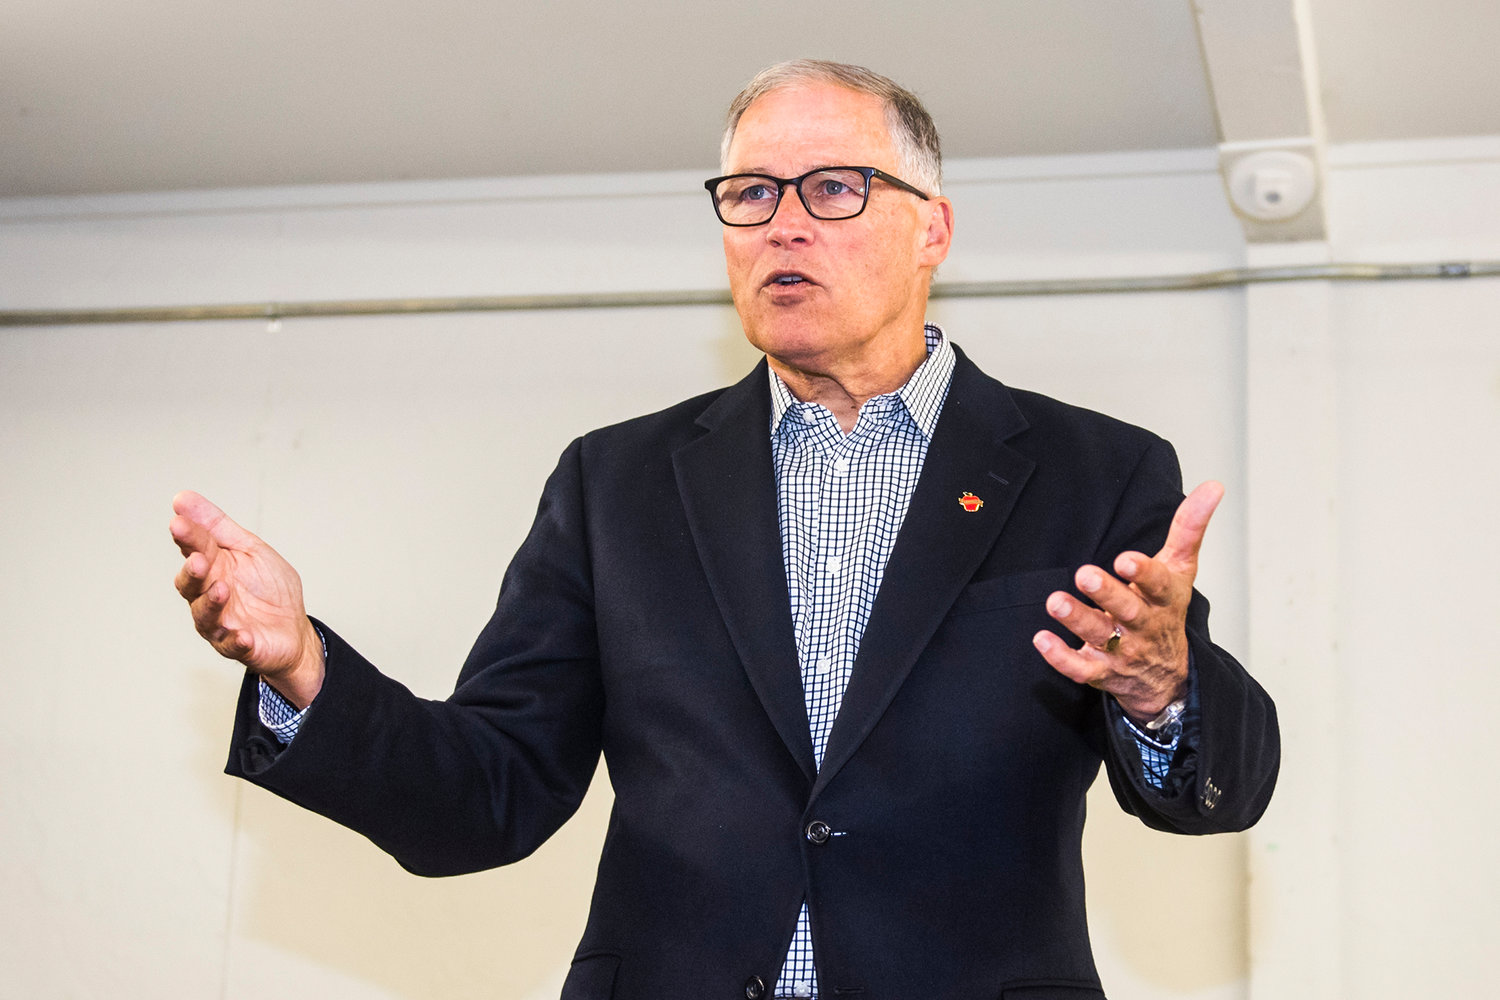 FILE PHOTO — Gov. Jay Inslee talks during a tour of the cold weather shelter at the Southwest Washington Fairgrounds in Chehalis in 2019.